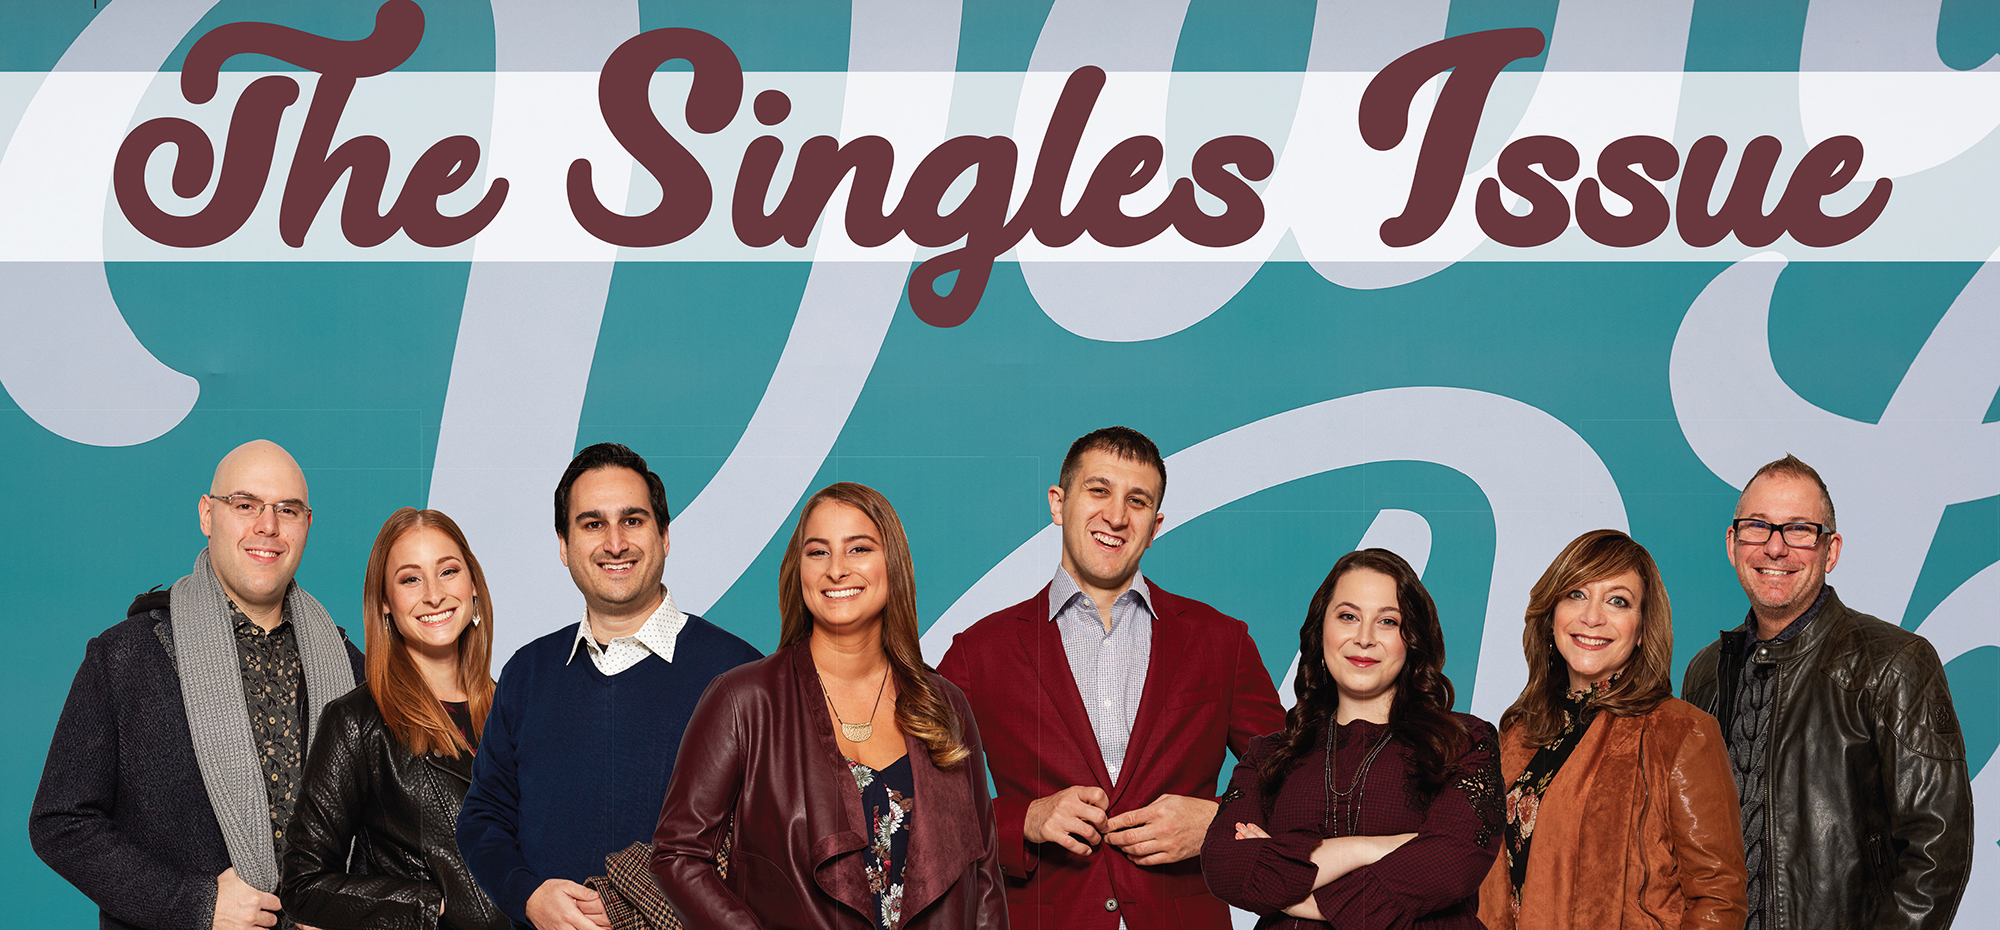 The 2018 Jstyle Singles